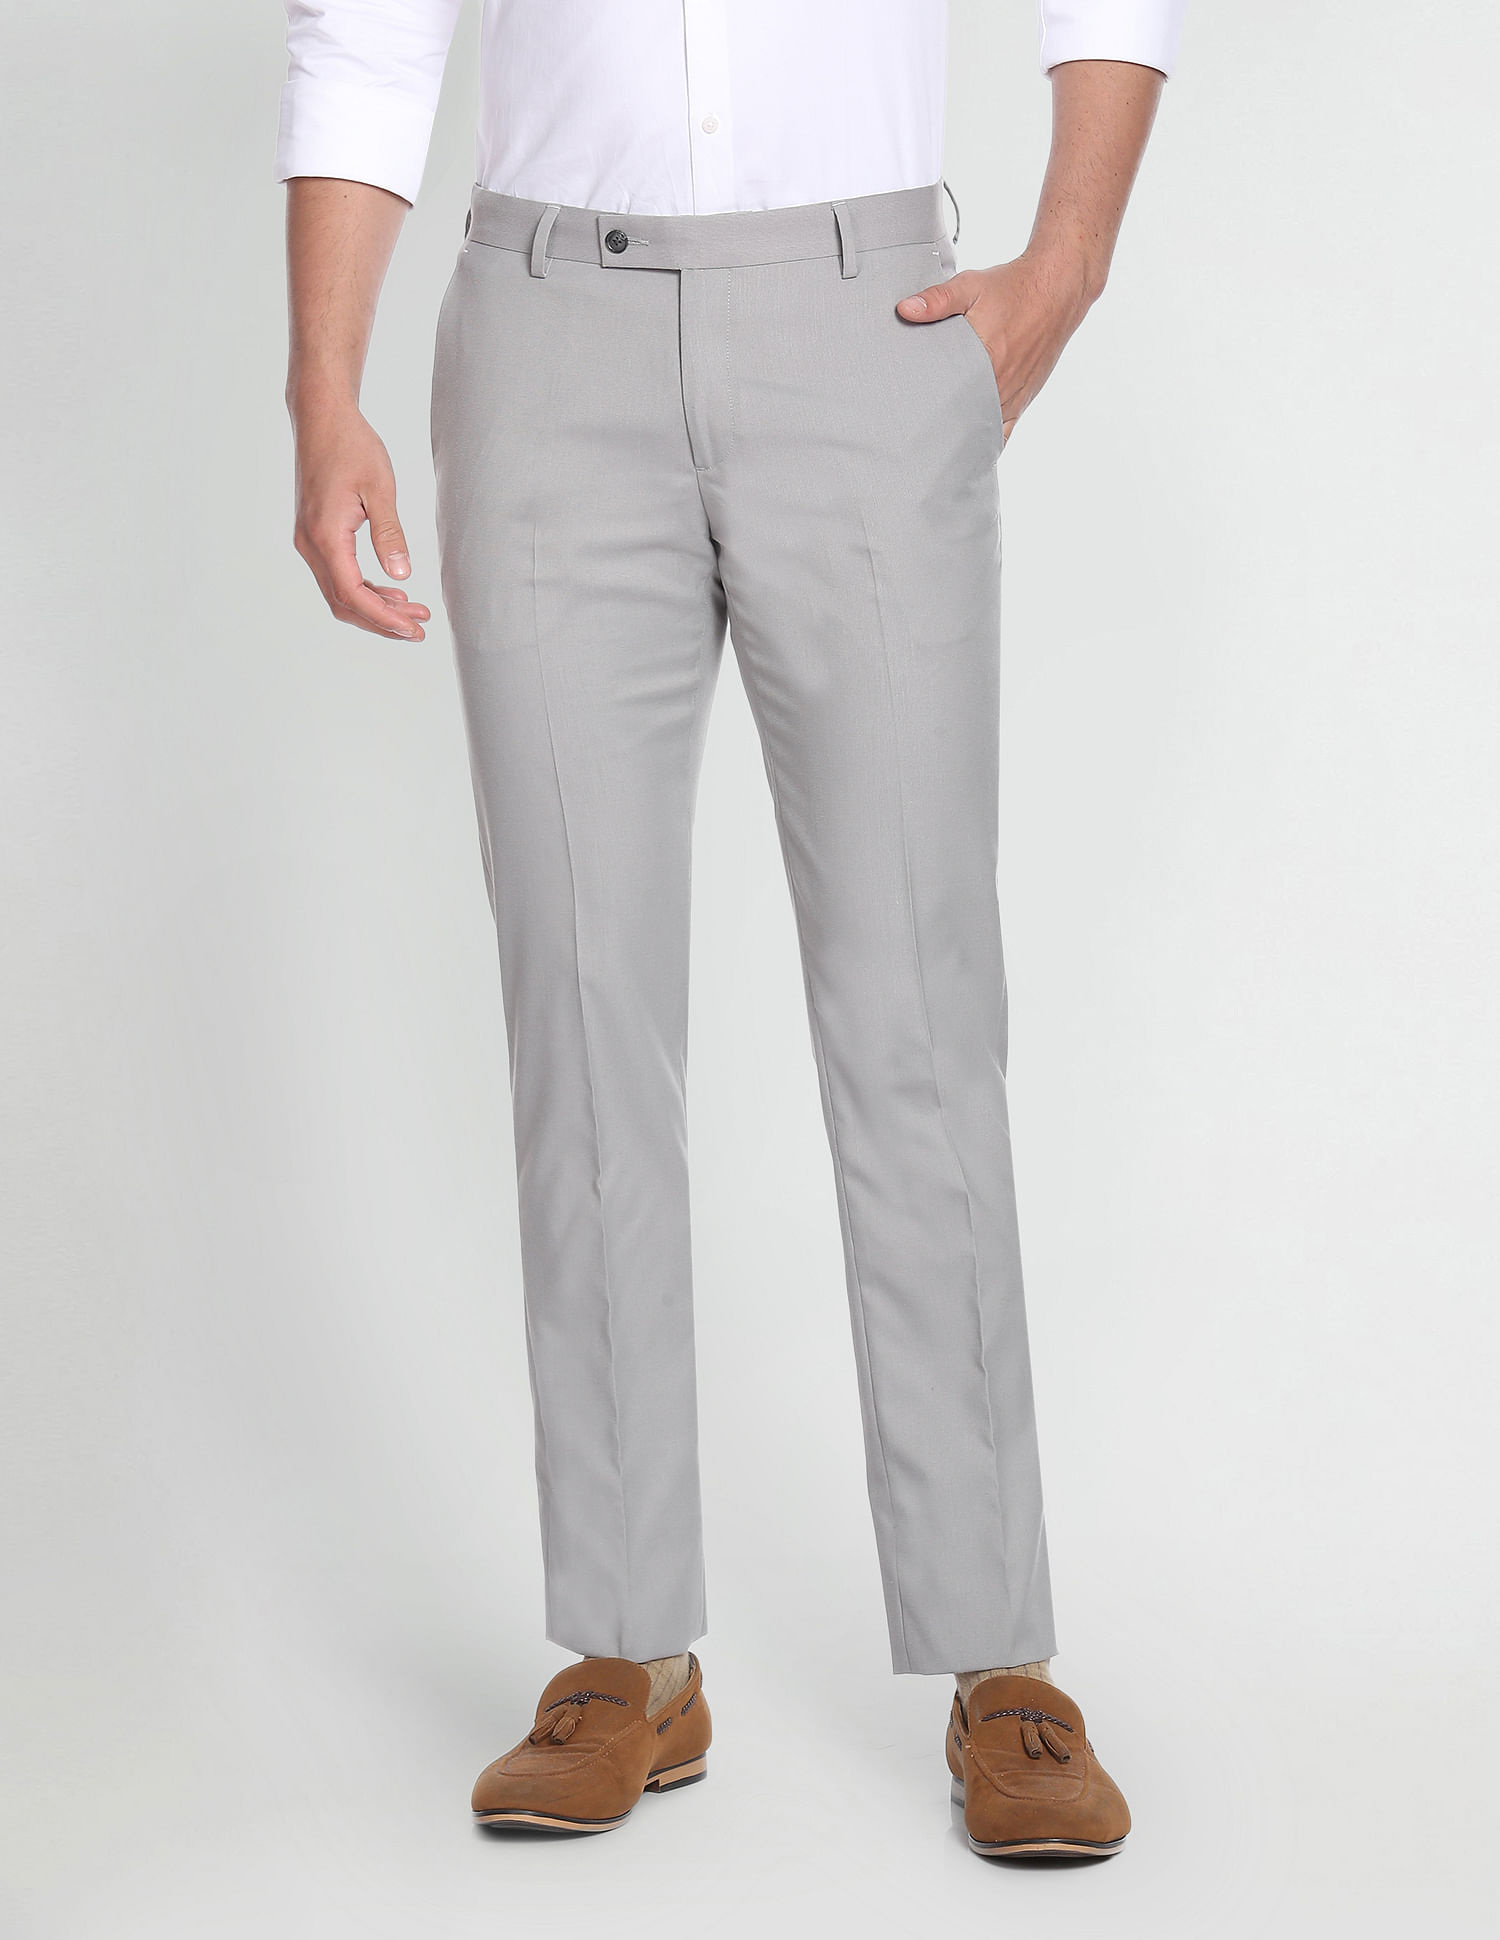 Mineral Grey Stretch Pants